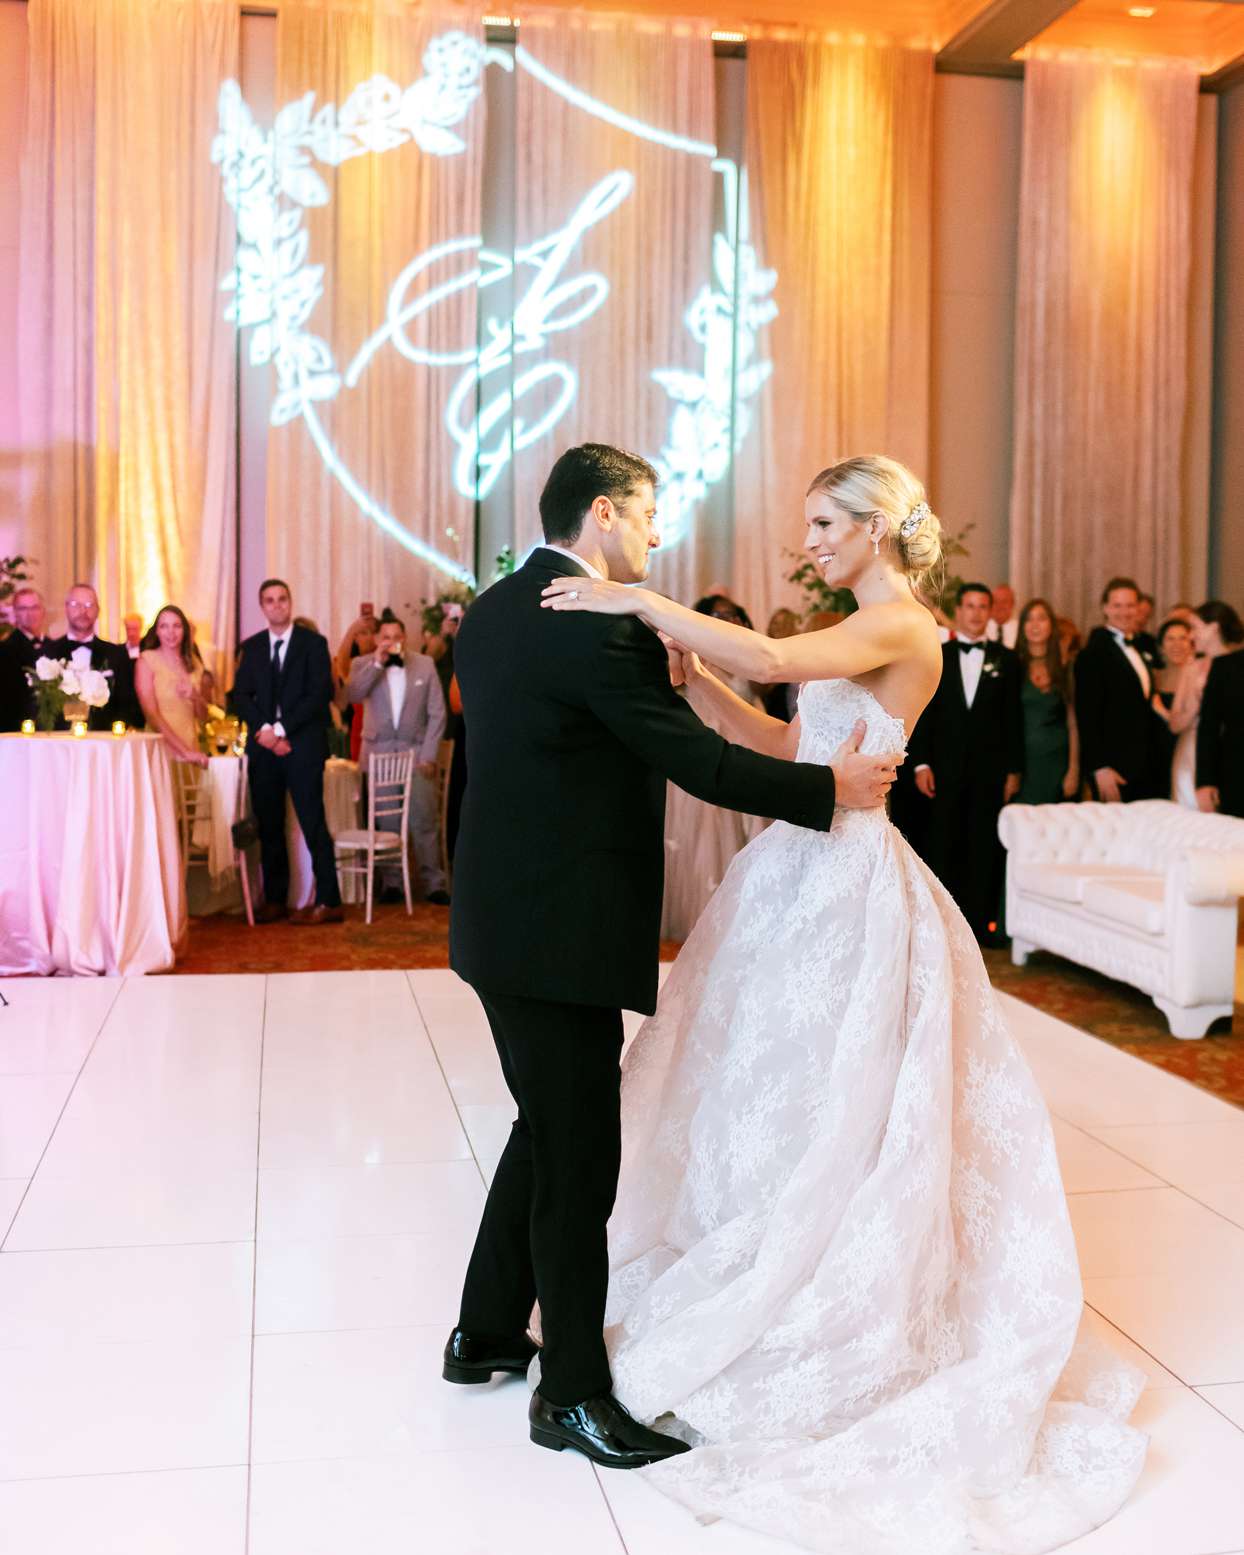 bride and groom share first dance on white tile dance floor surrounded by guests